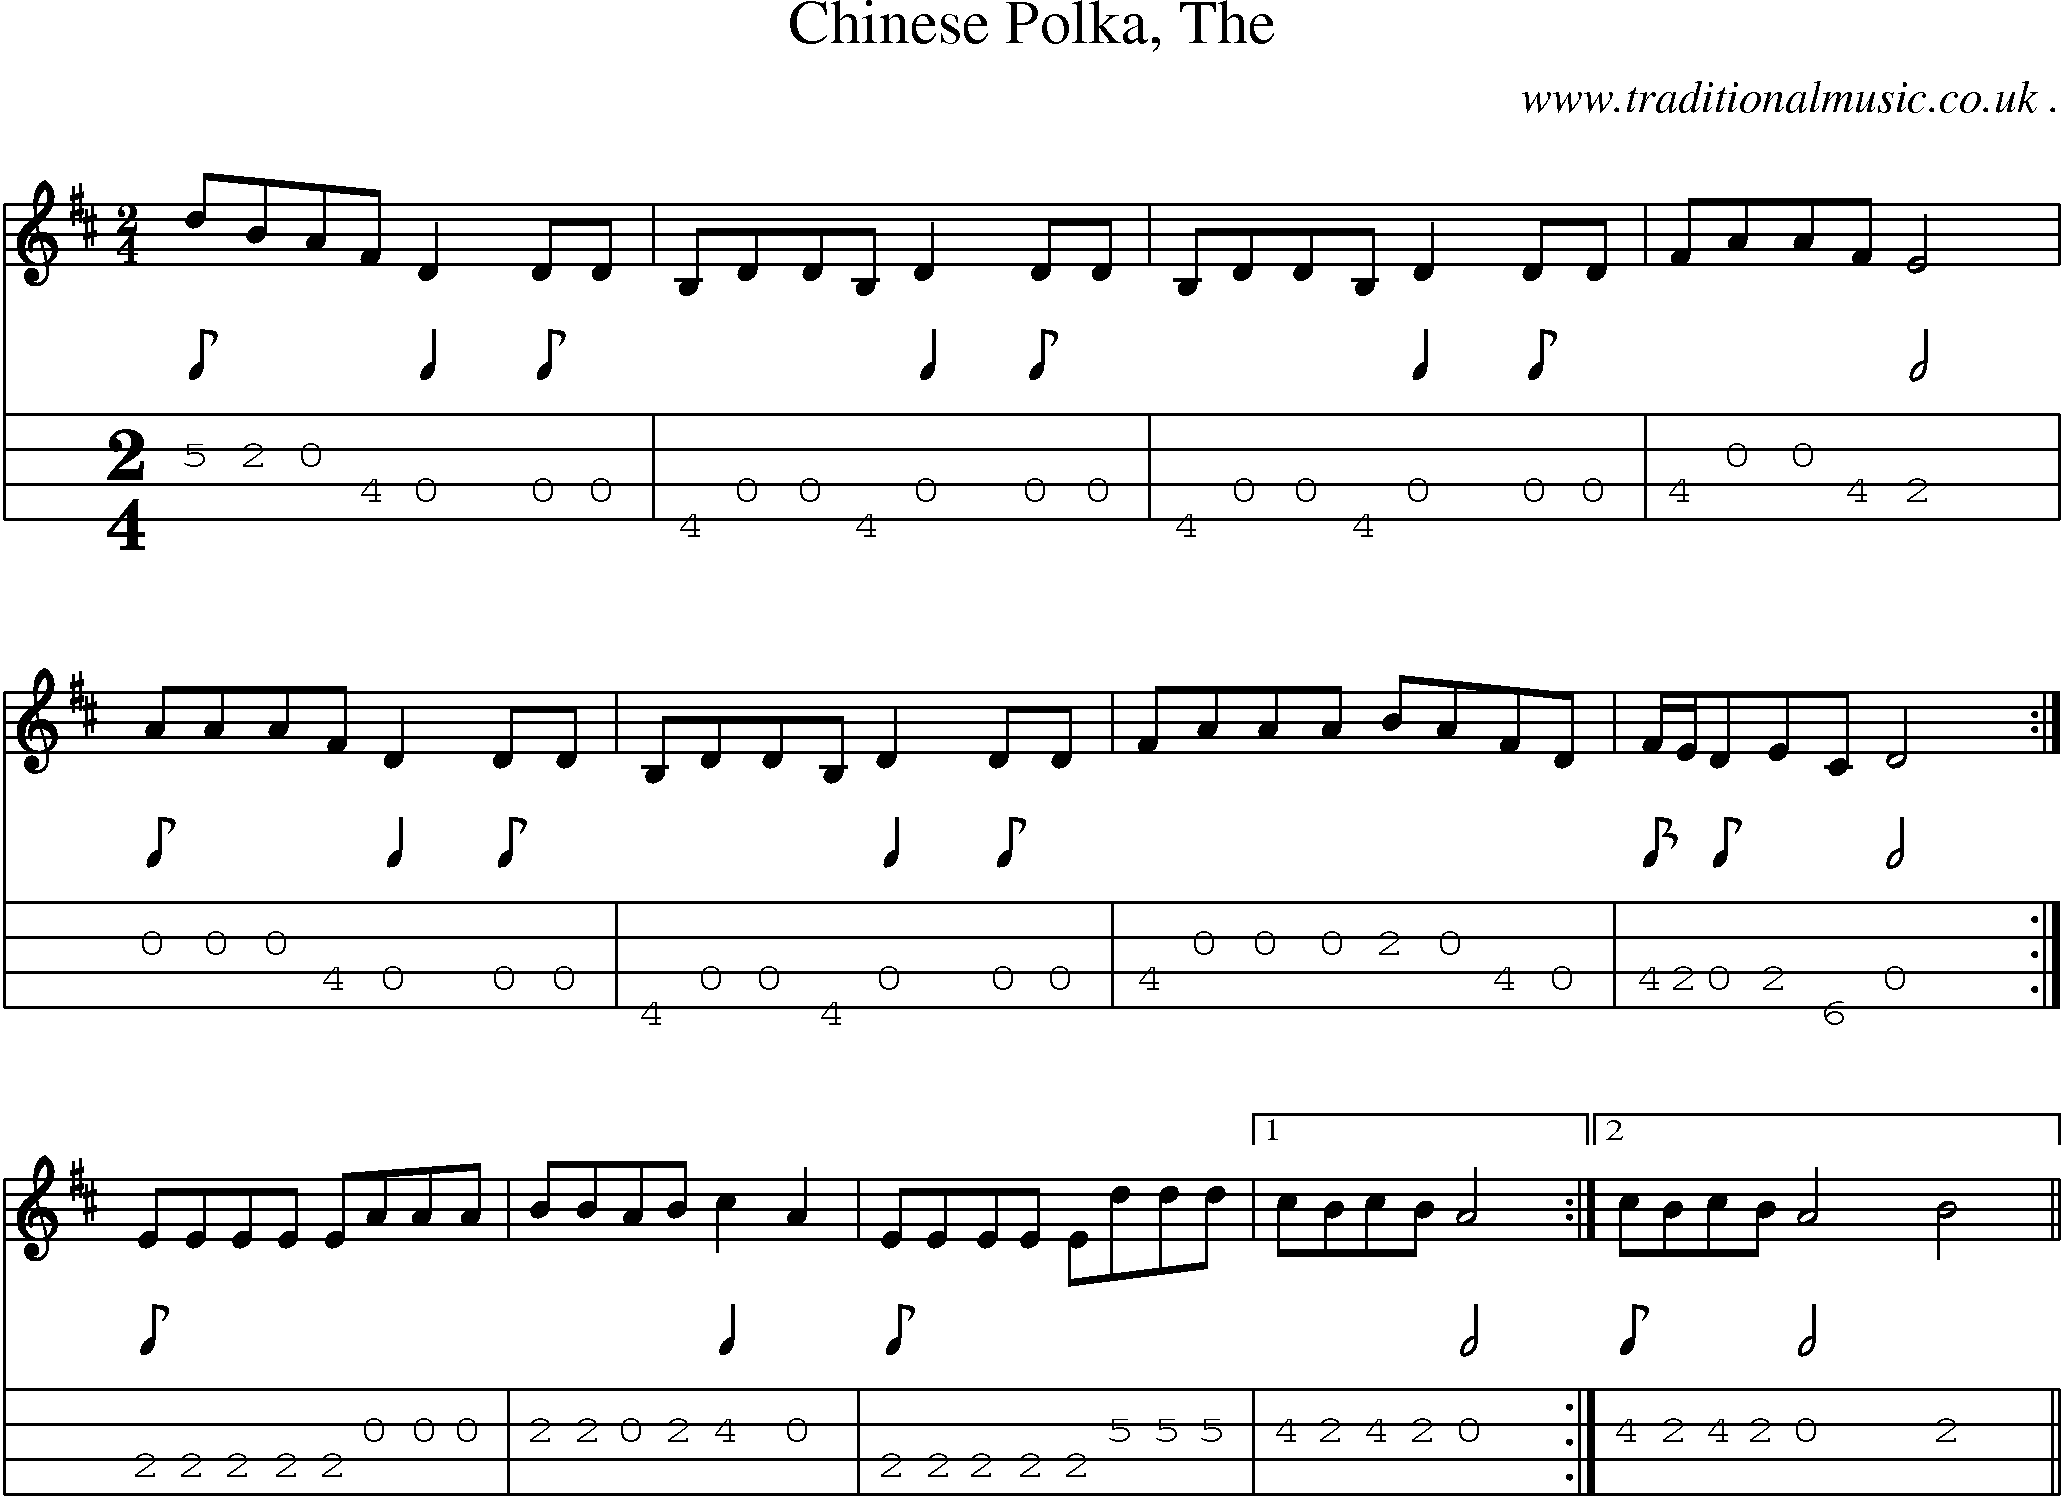 Music Score and Mandolin Tabs for Chinese Polka